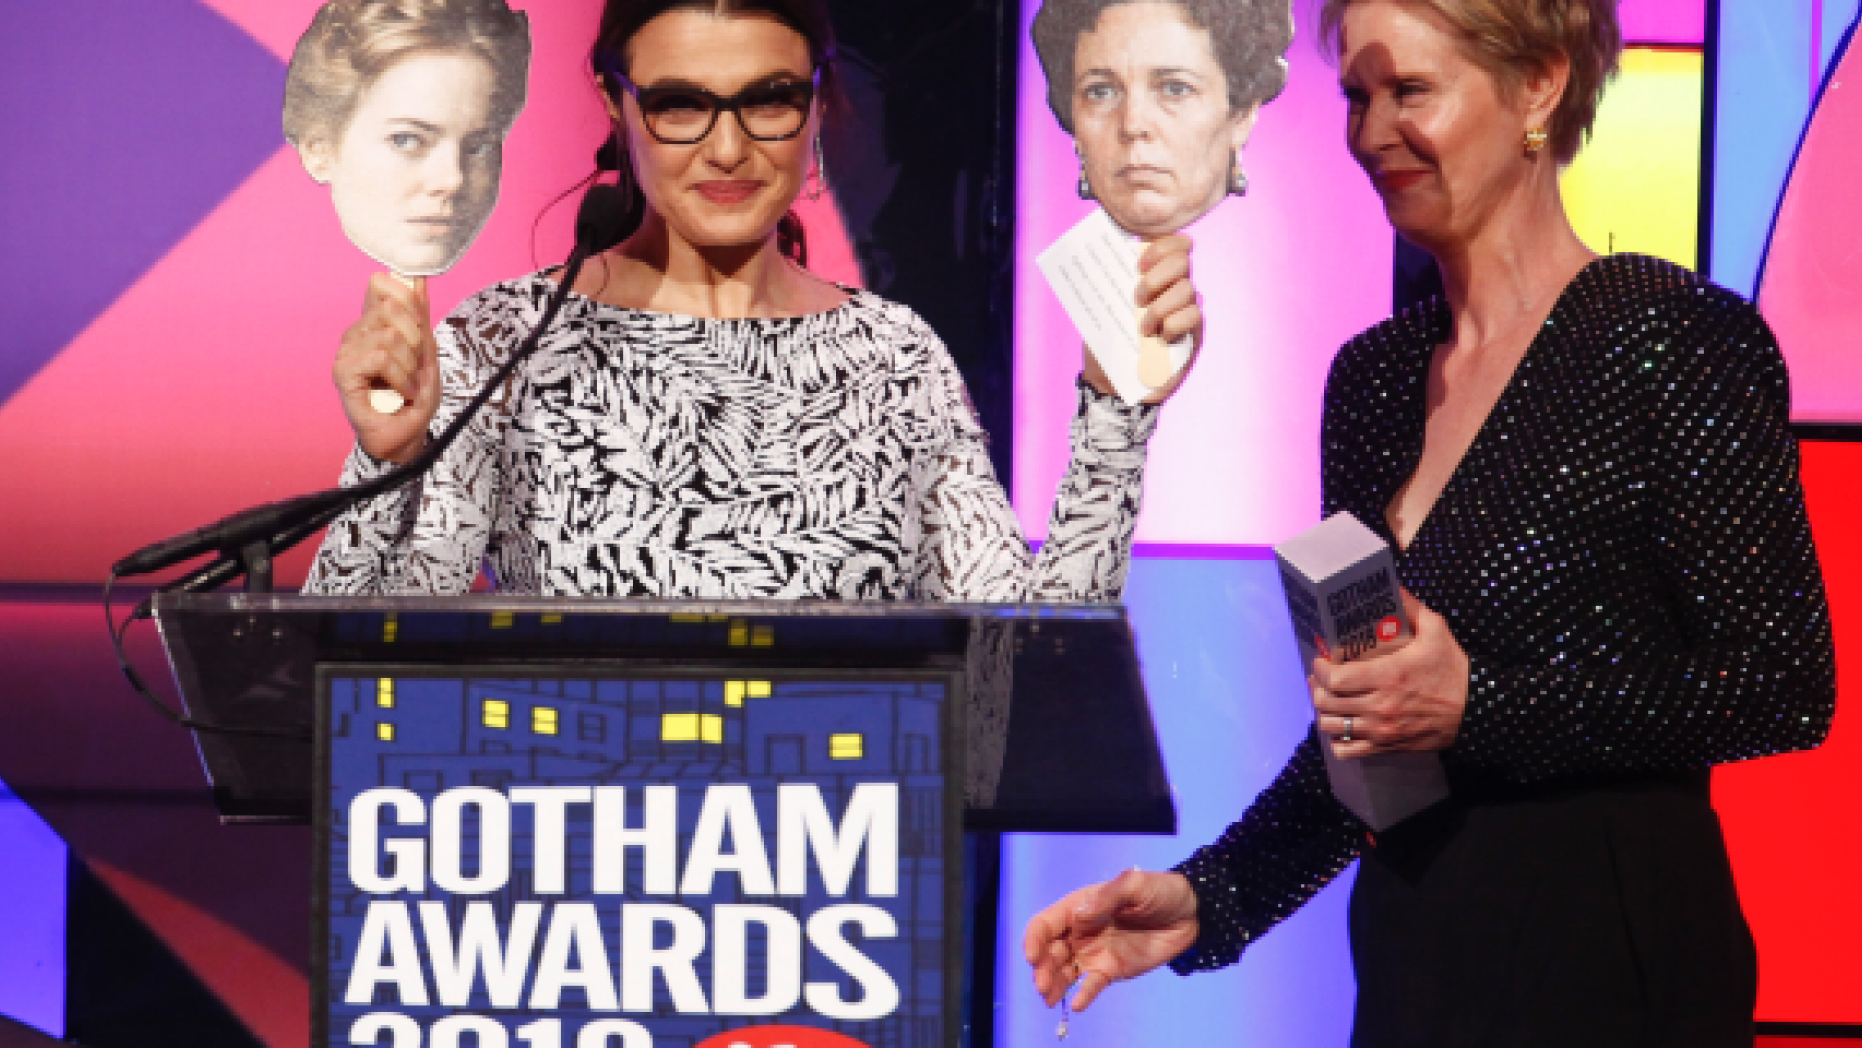 Actress Rachel Weisz, left, holds photos of her co-stars Emma Stone and Olivia Colman from the movie "The Favorite" as she accepts a special honor from Cynthia Nixon, right, at the 28th annual Independent Filmmaker Project's Gotham Awards at Cipriani Wall Street on Monday, Nov. 26, 2018, in New York.